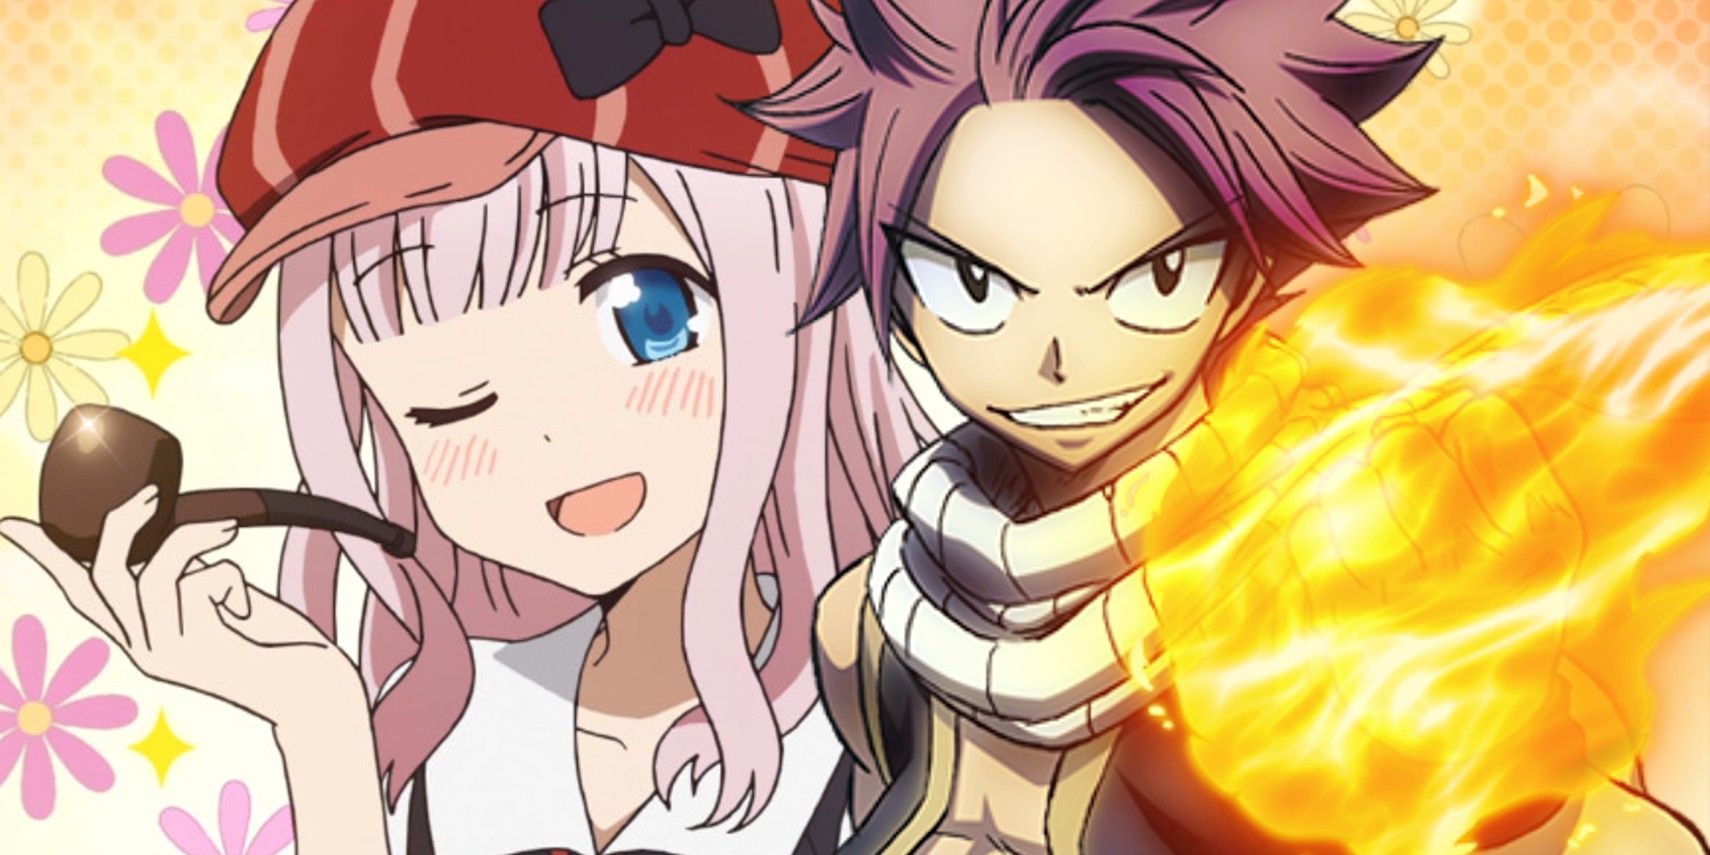 Fairy Tail Was Either Loved or Hated By Anime Fans - But Why?